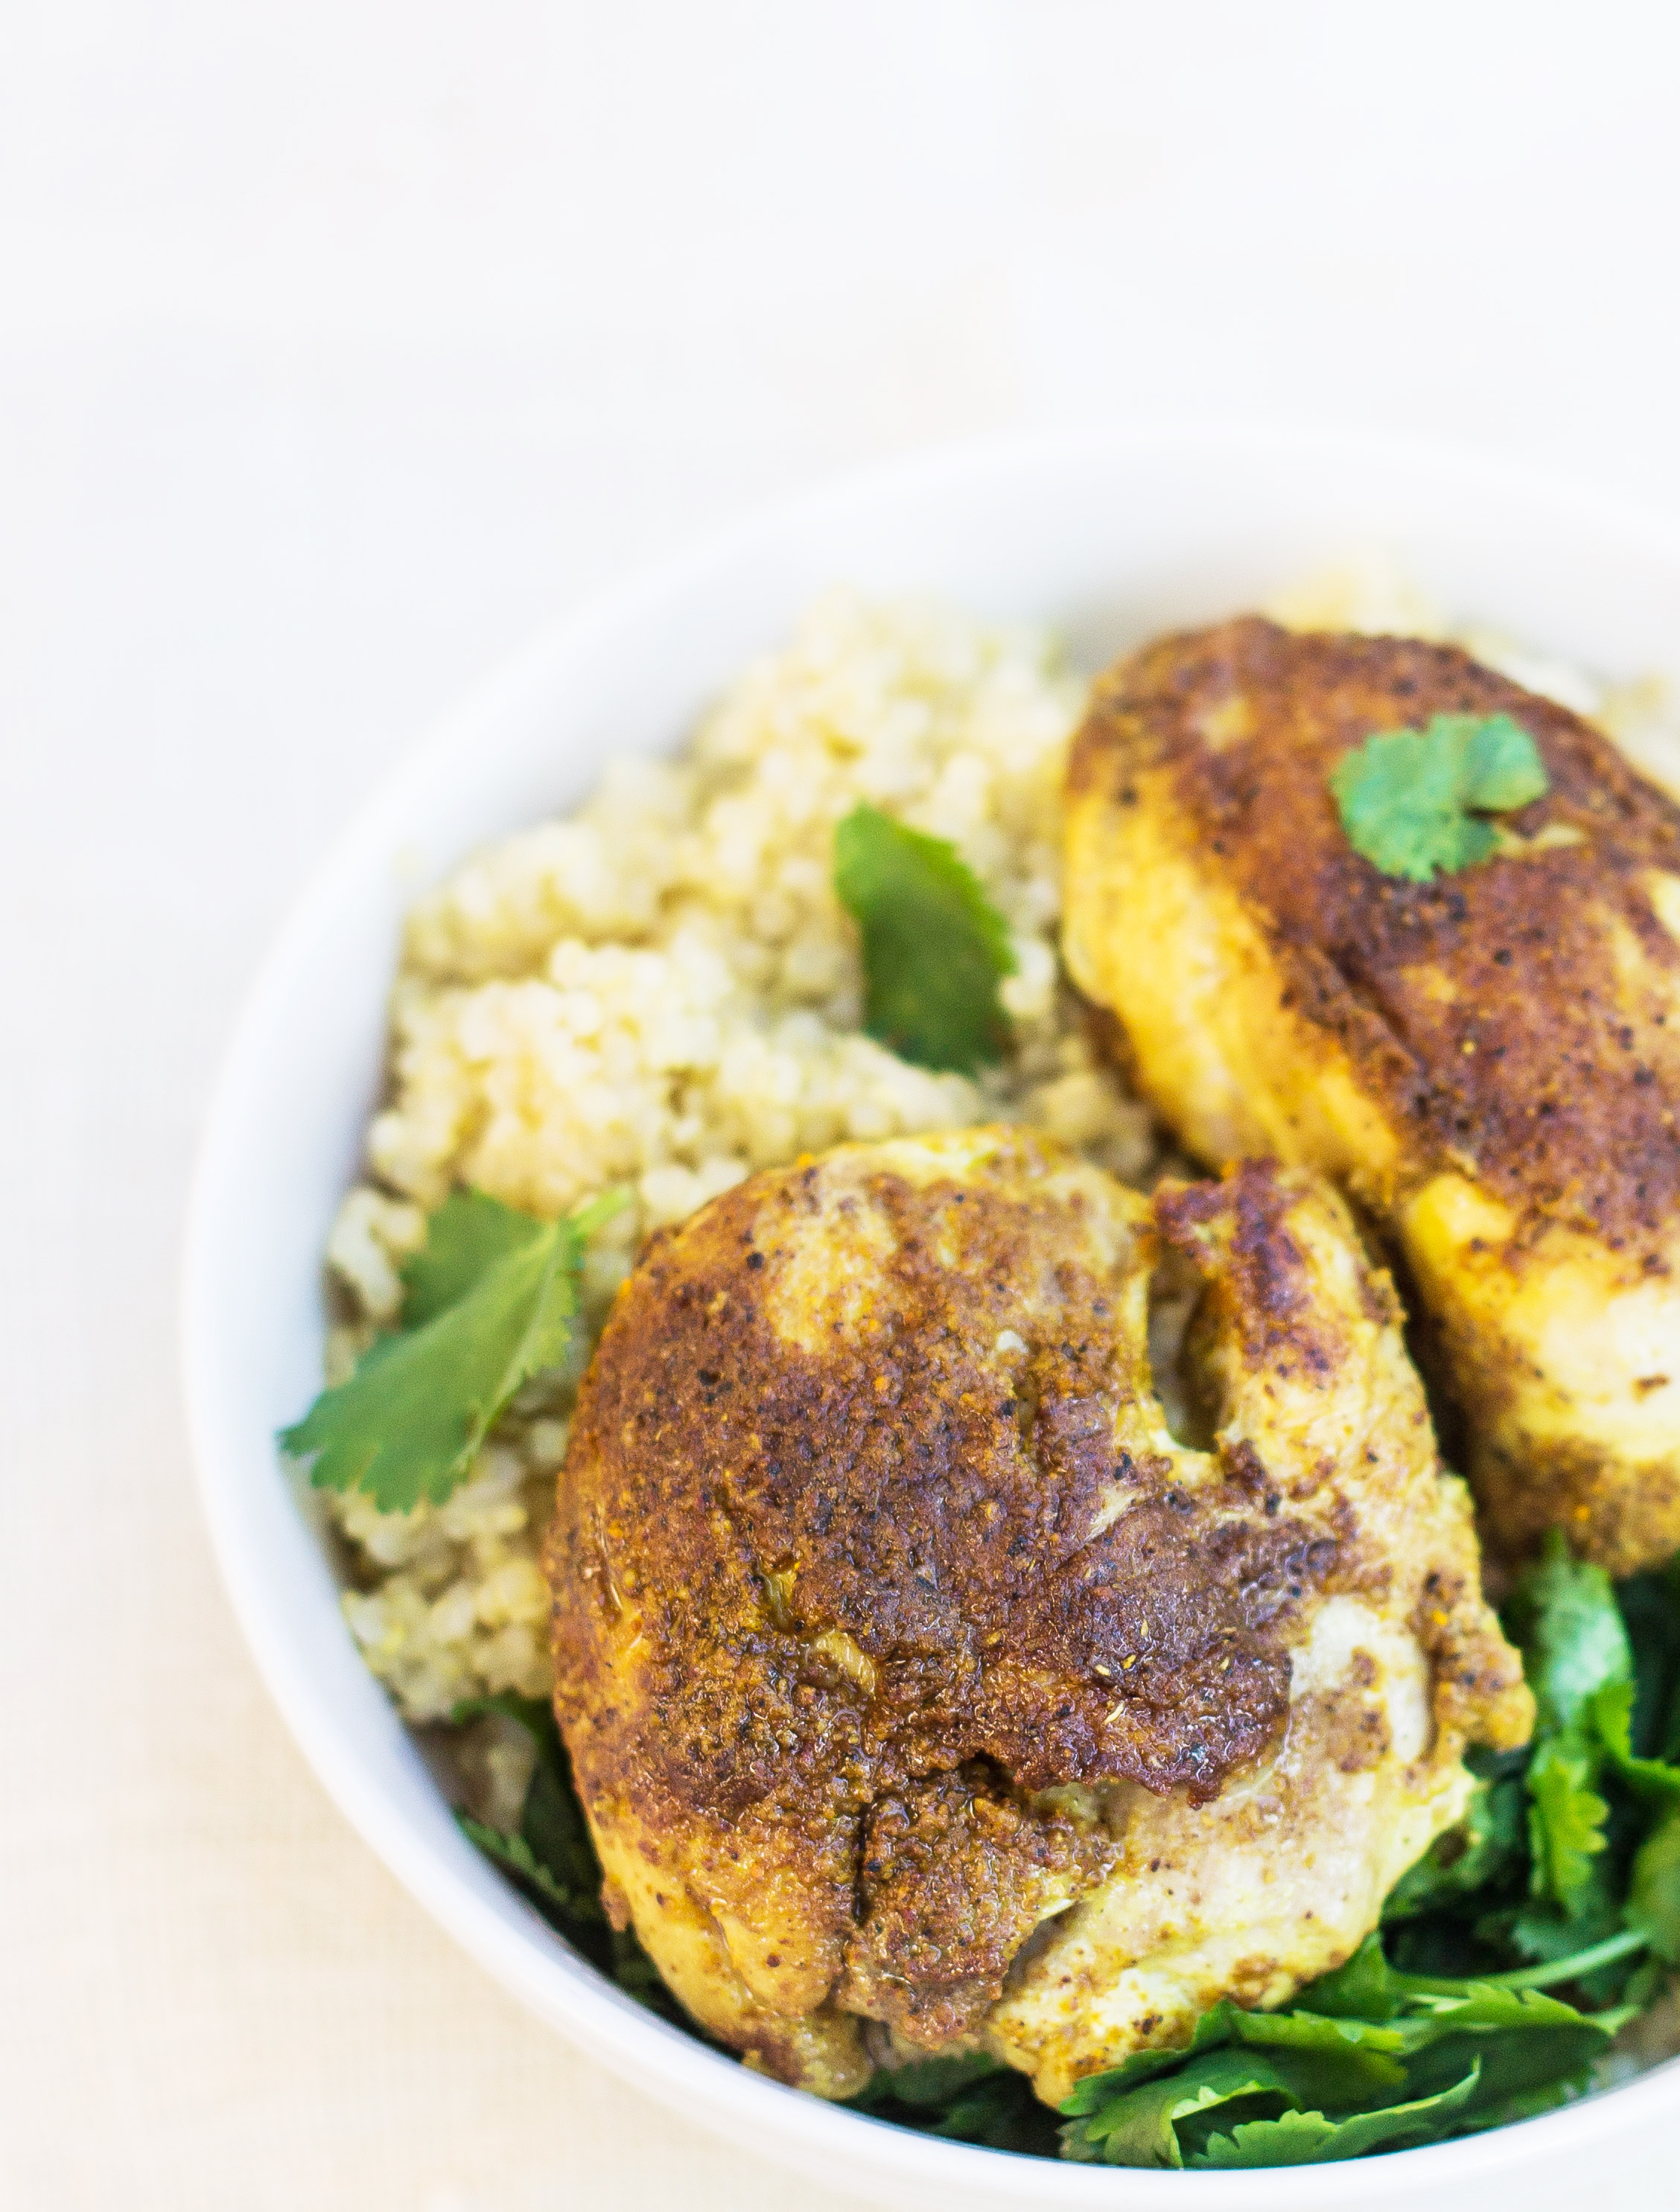 Indian-Spiced Chicken - A simple recipe from InspiredRD.com #glutenfree